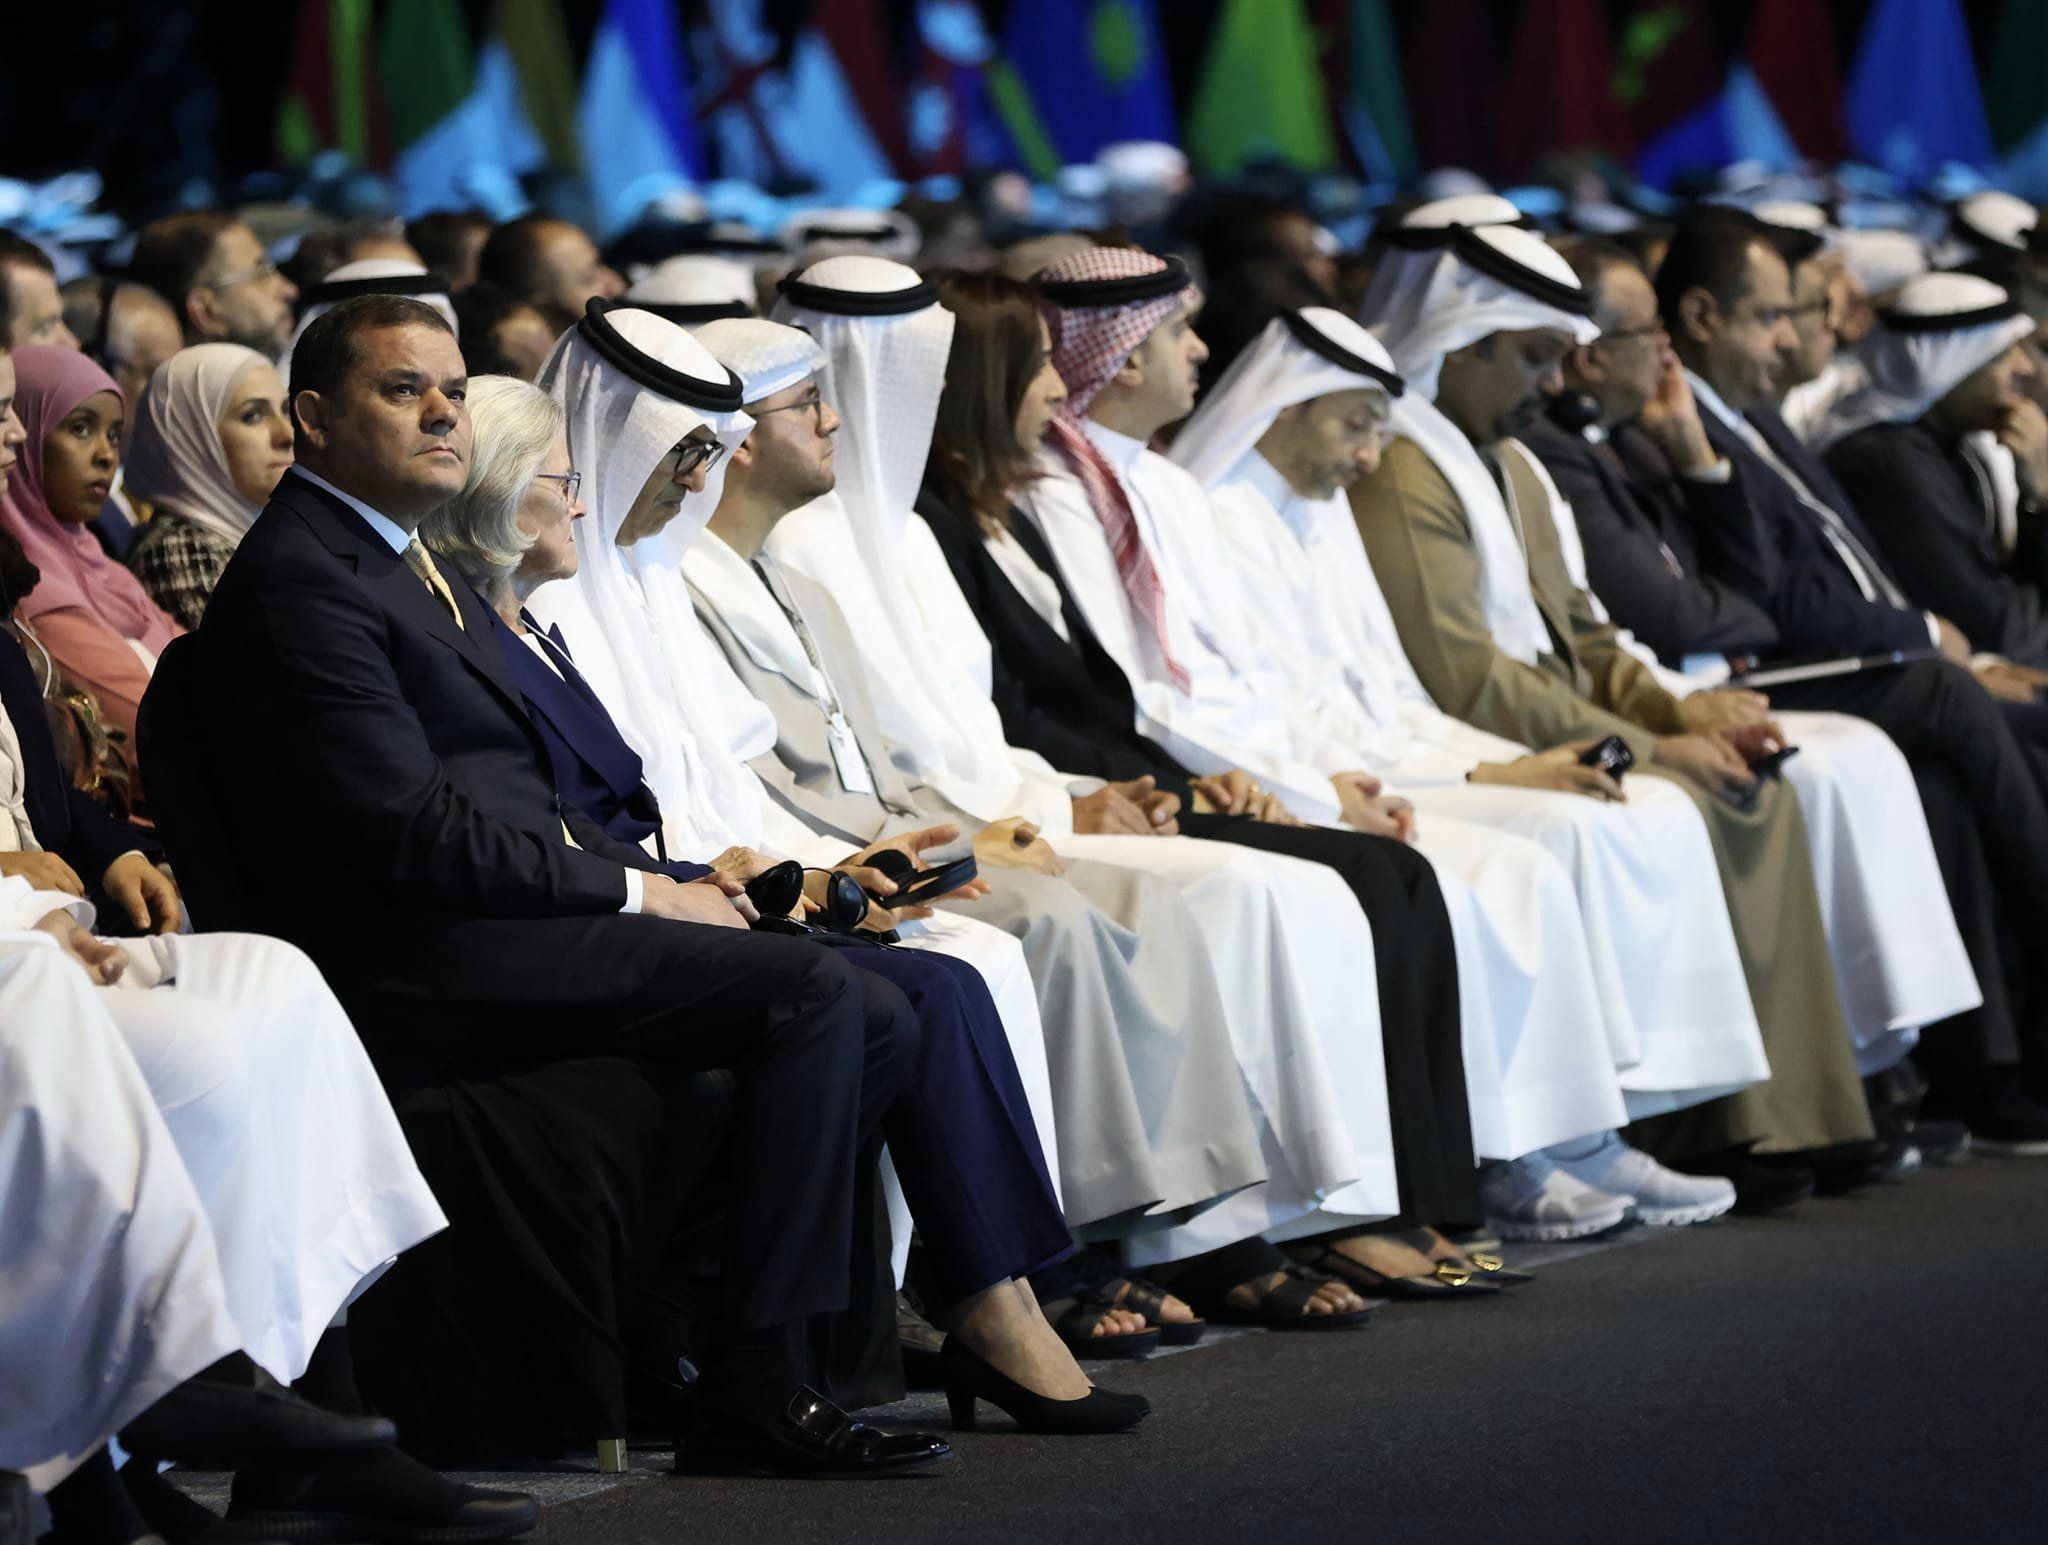 Dbeibah participates in the World Government Summit in the UAE.